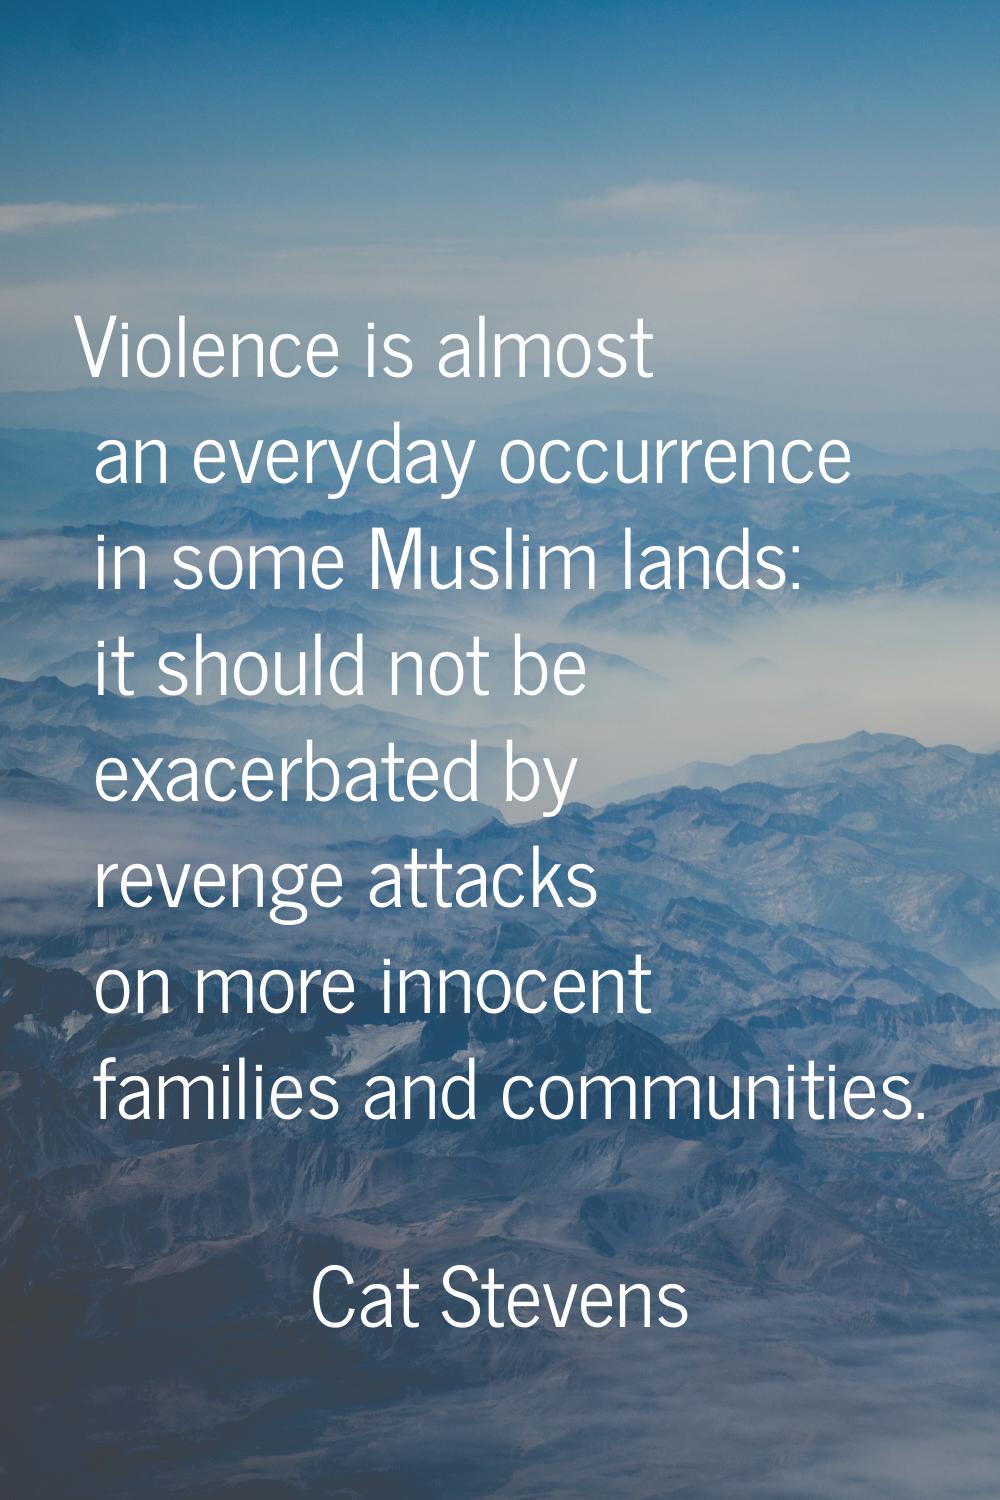 Violence is almost an everyday occurrence in some Muslim lands: it should not be exacerbated by rev